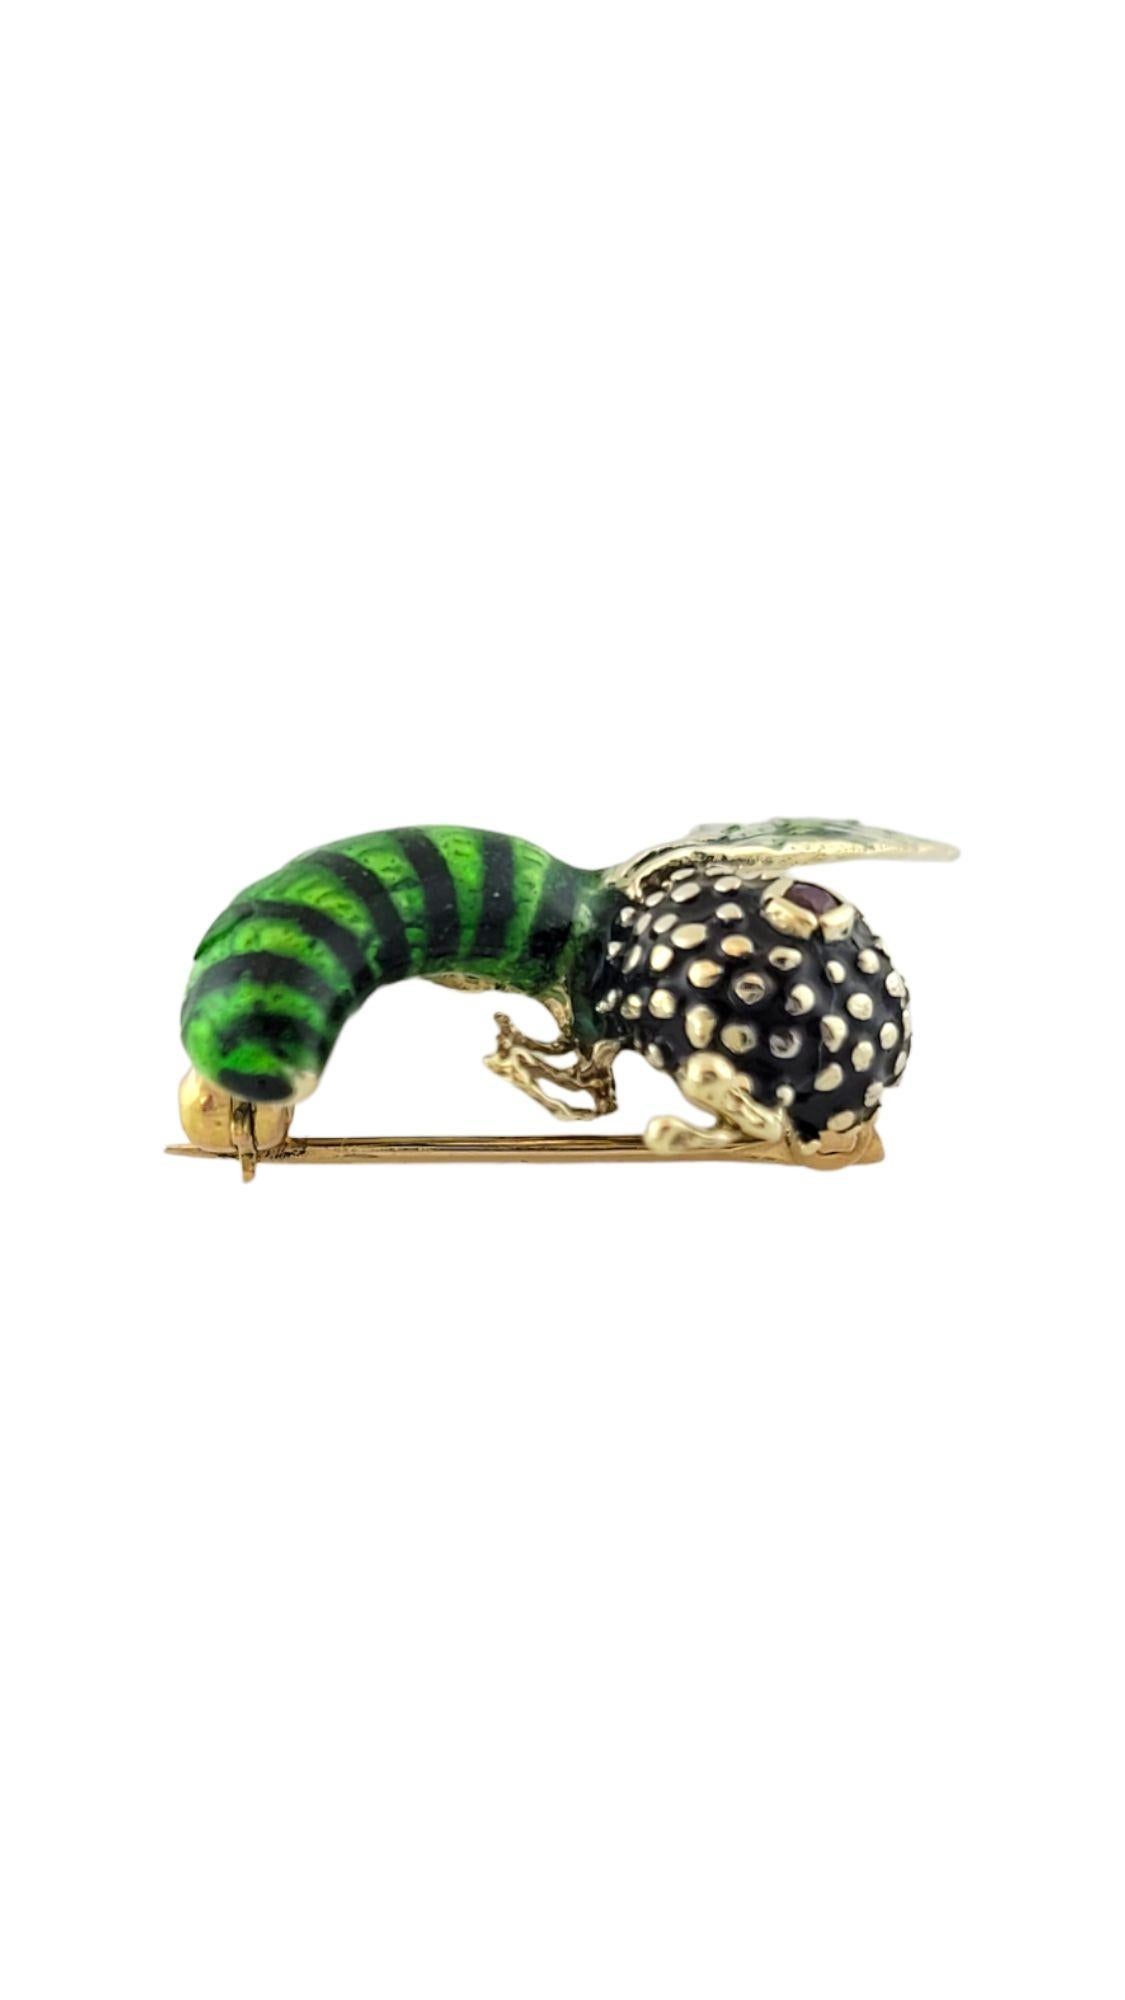 Vintage 14K Yellow Gold Green and Black Enamel Wasp Pin

This 14K yellow gold wasp pin is decorated with green and black enamel as well as a red cabochon stone to represent an eye!

Size: 25.1mm X 20mm X 6.8mm

Weight: 4.5 g/ 2.9 dwt

Hallmark: